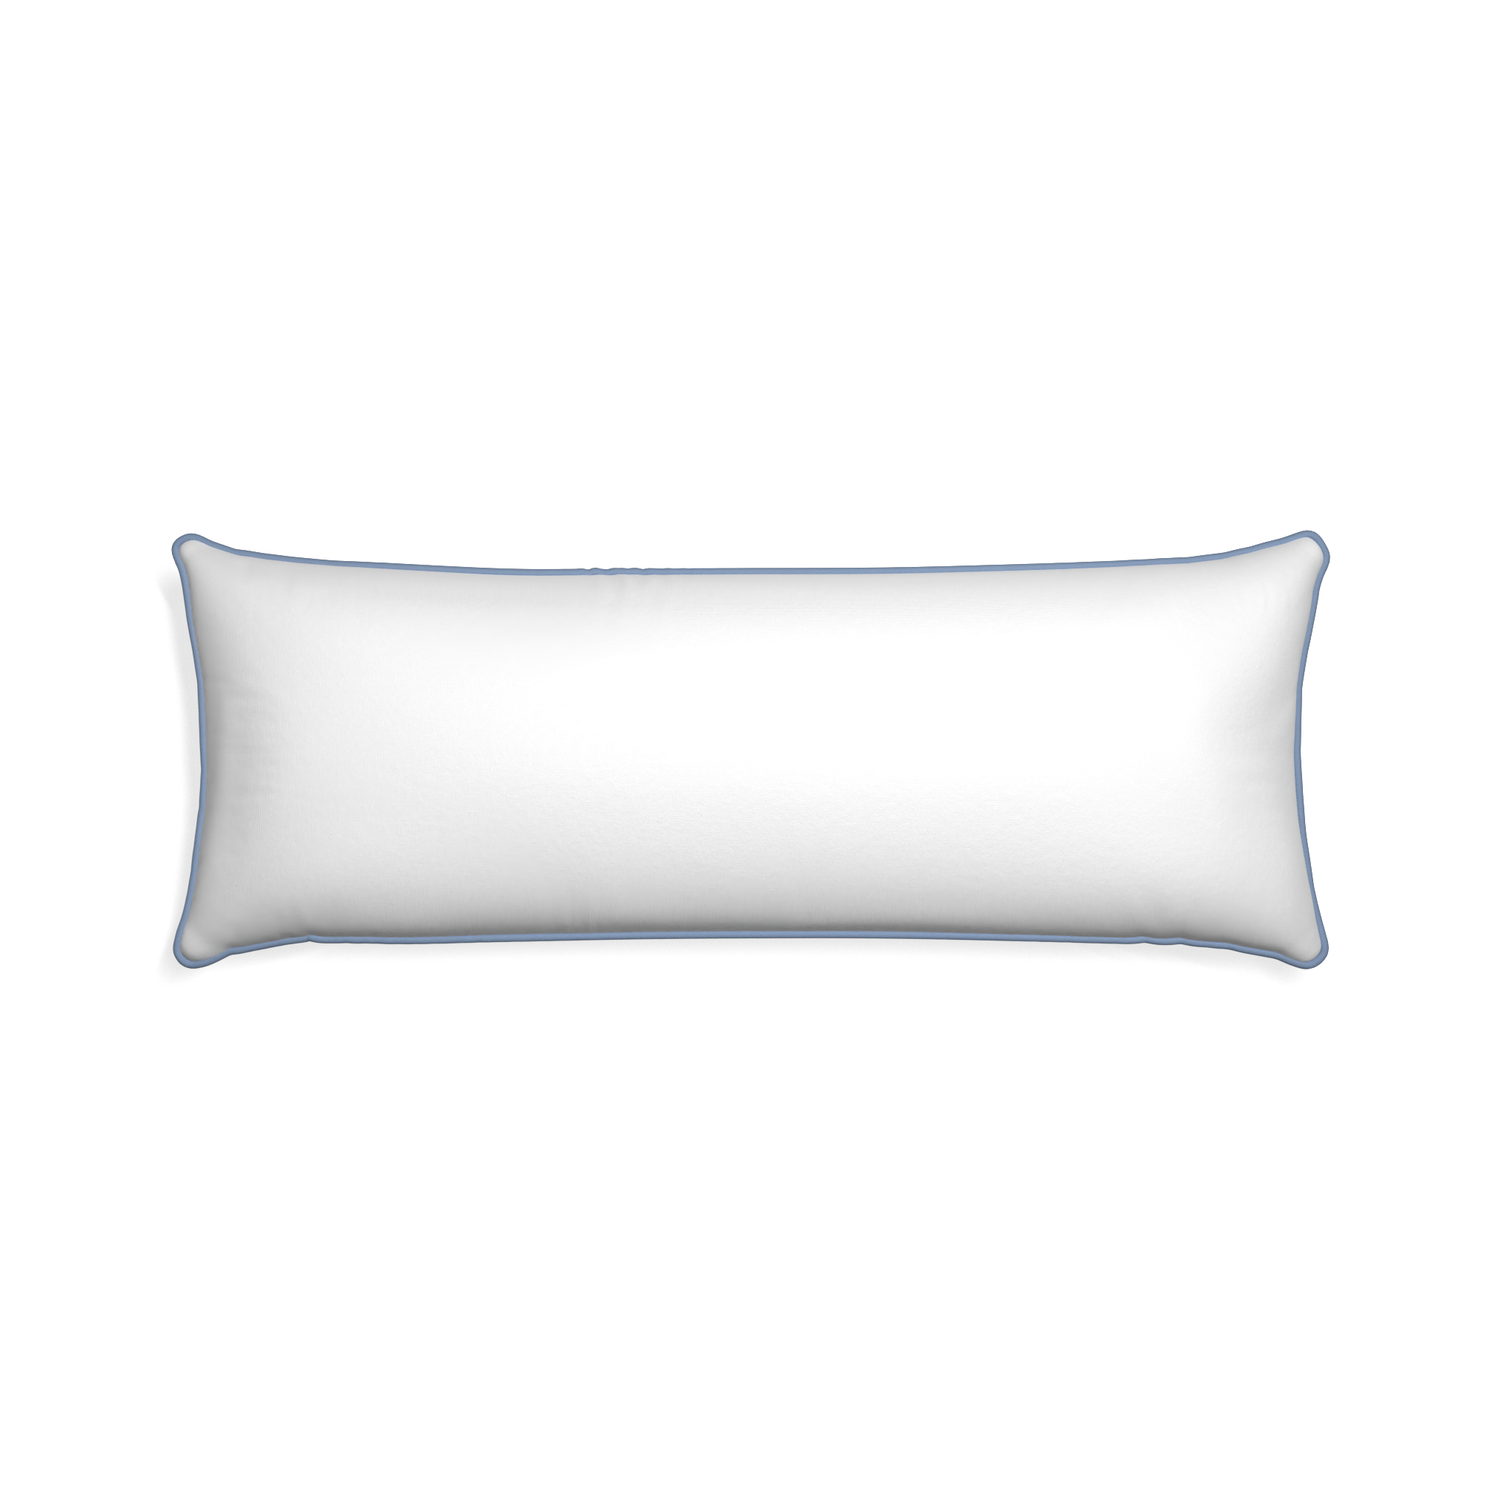 Xl-lumbar snow custom white cottonpillow with sky piping on white background